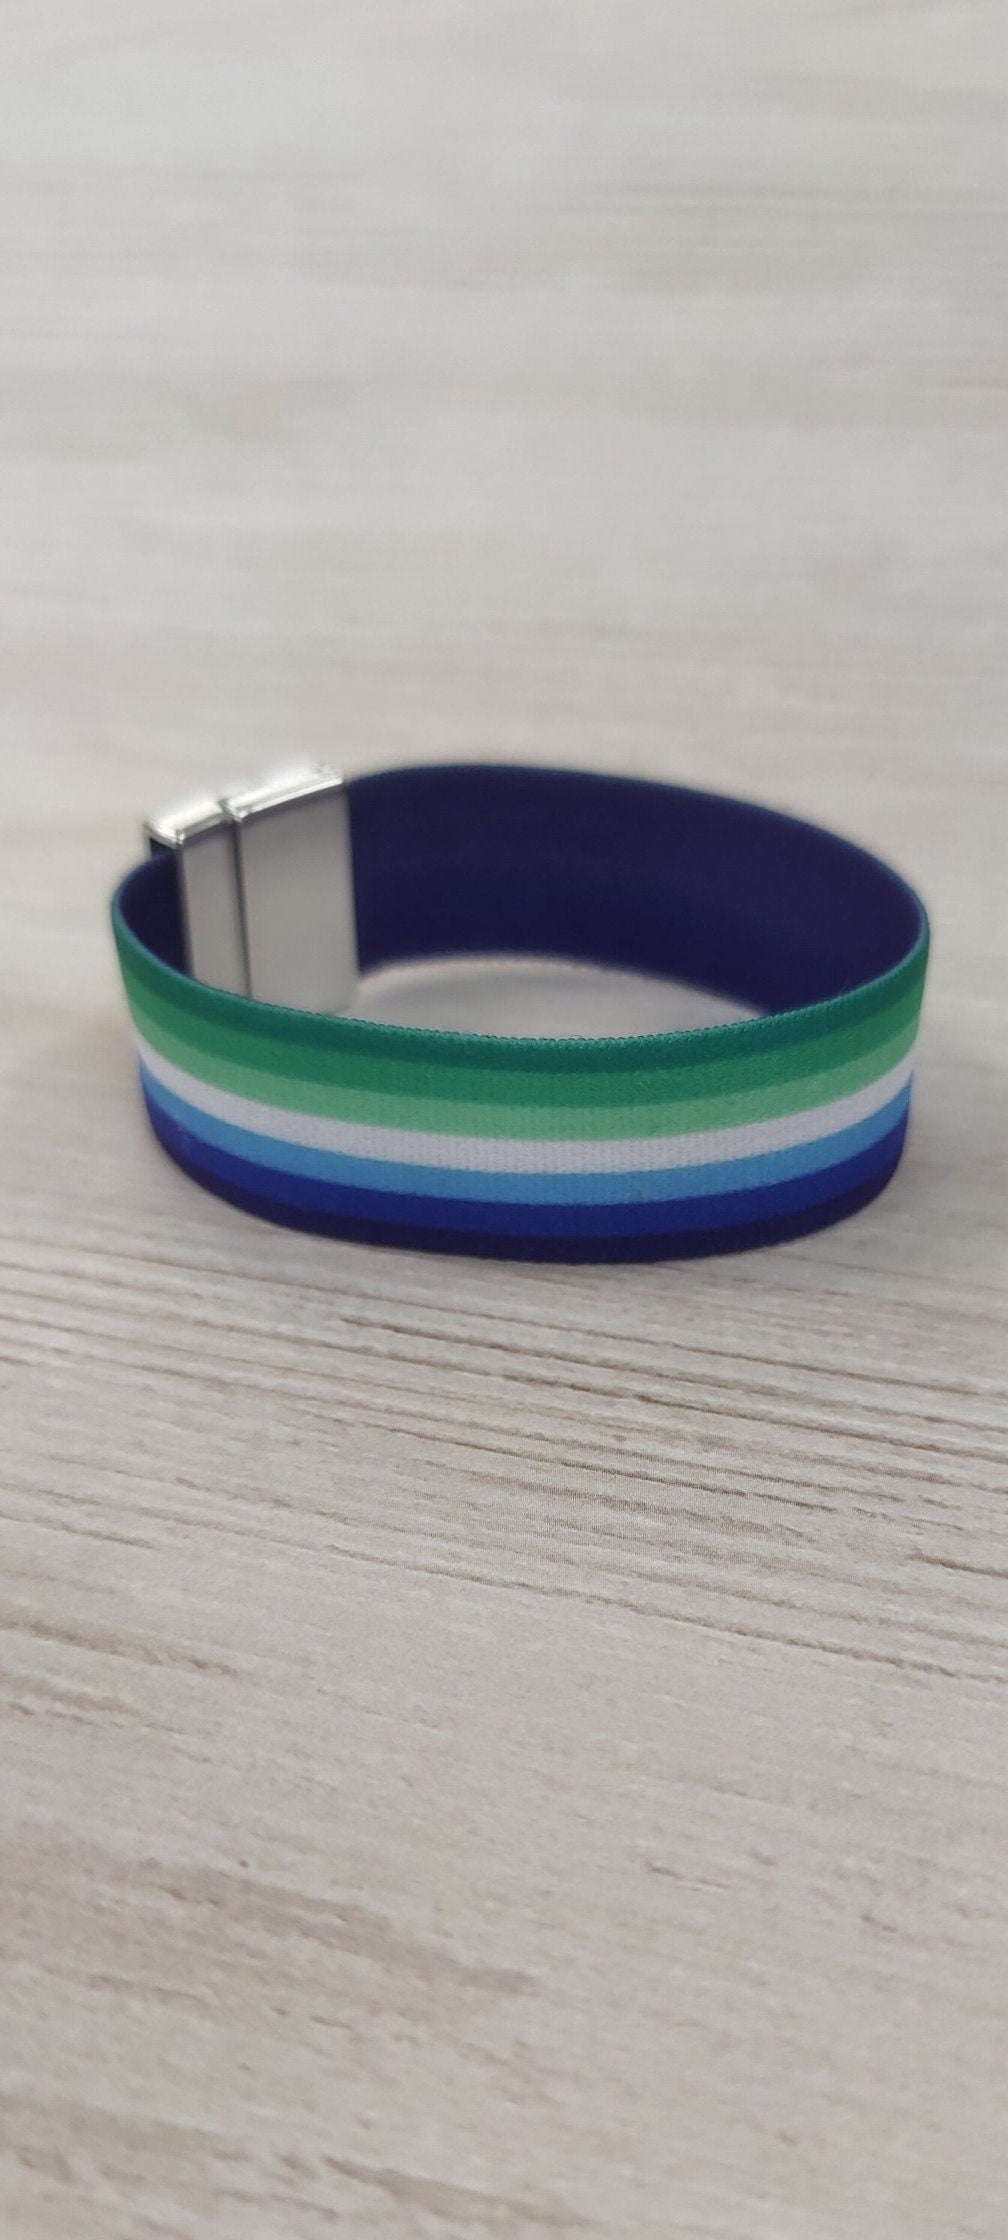 Gay Pride Flag - Thick Elastic Wristband Bracelet - stretchy elastic magnetic clasp - heavy duty, design does not fade, washable 7/8"